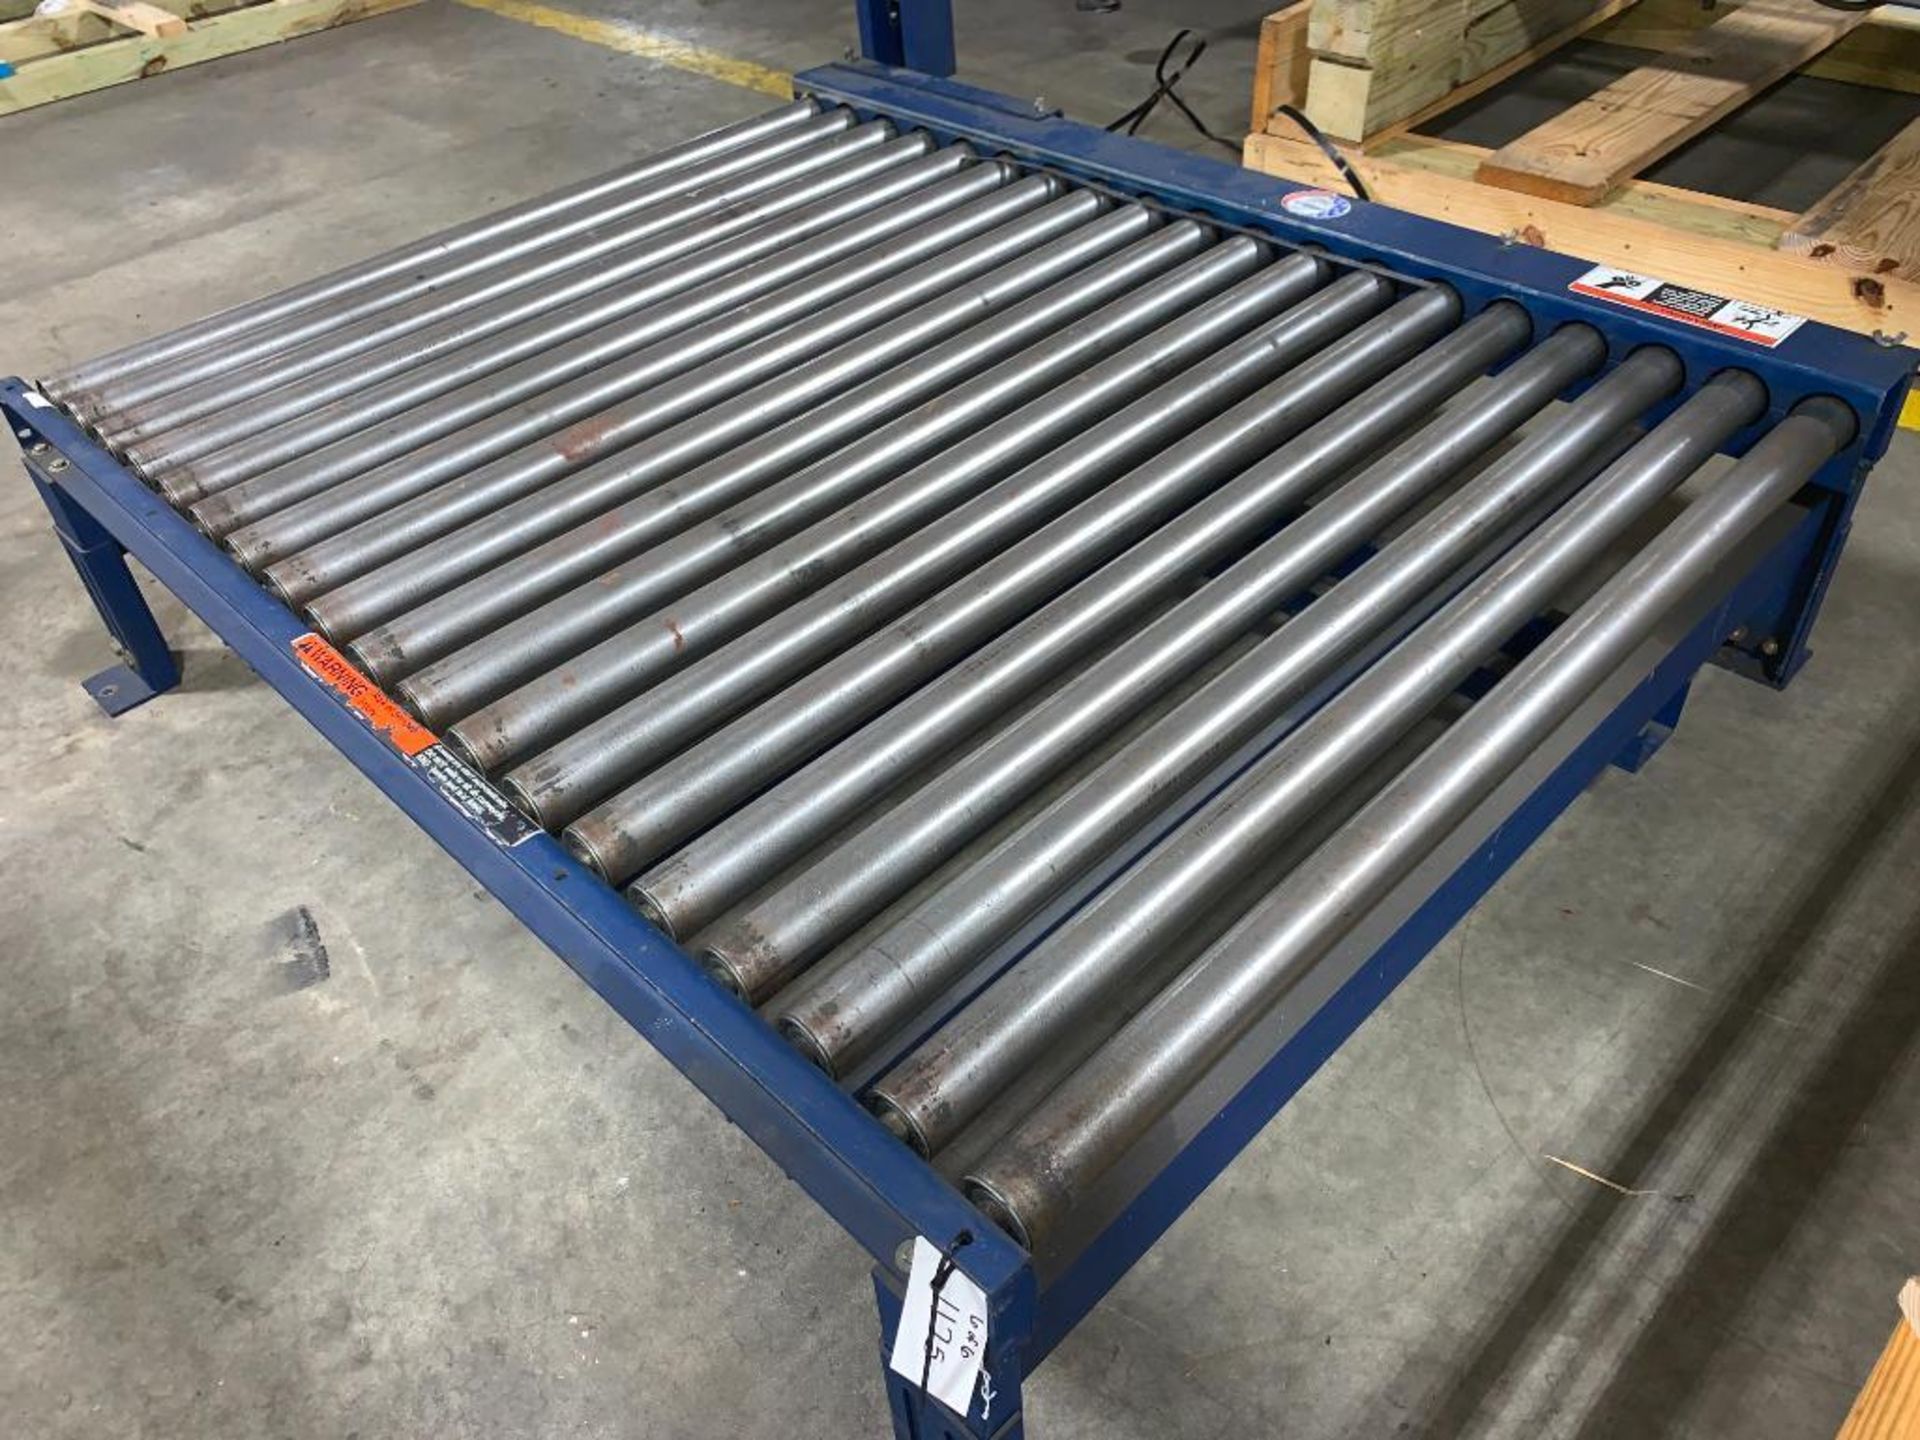 (6) skids of Lantech full pallet conveyor including turntable section - Located in Tifton, GA - Image 18 of 19